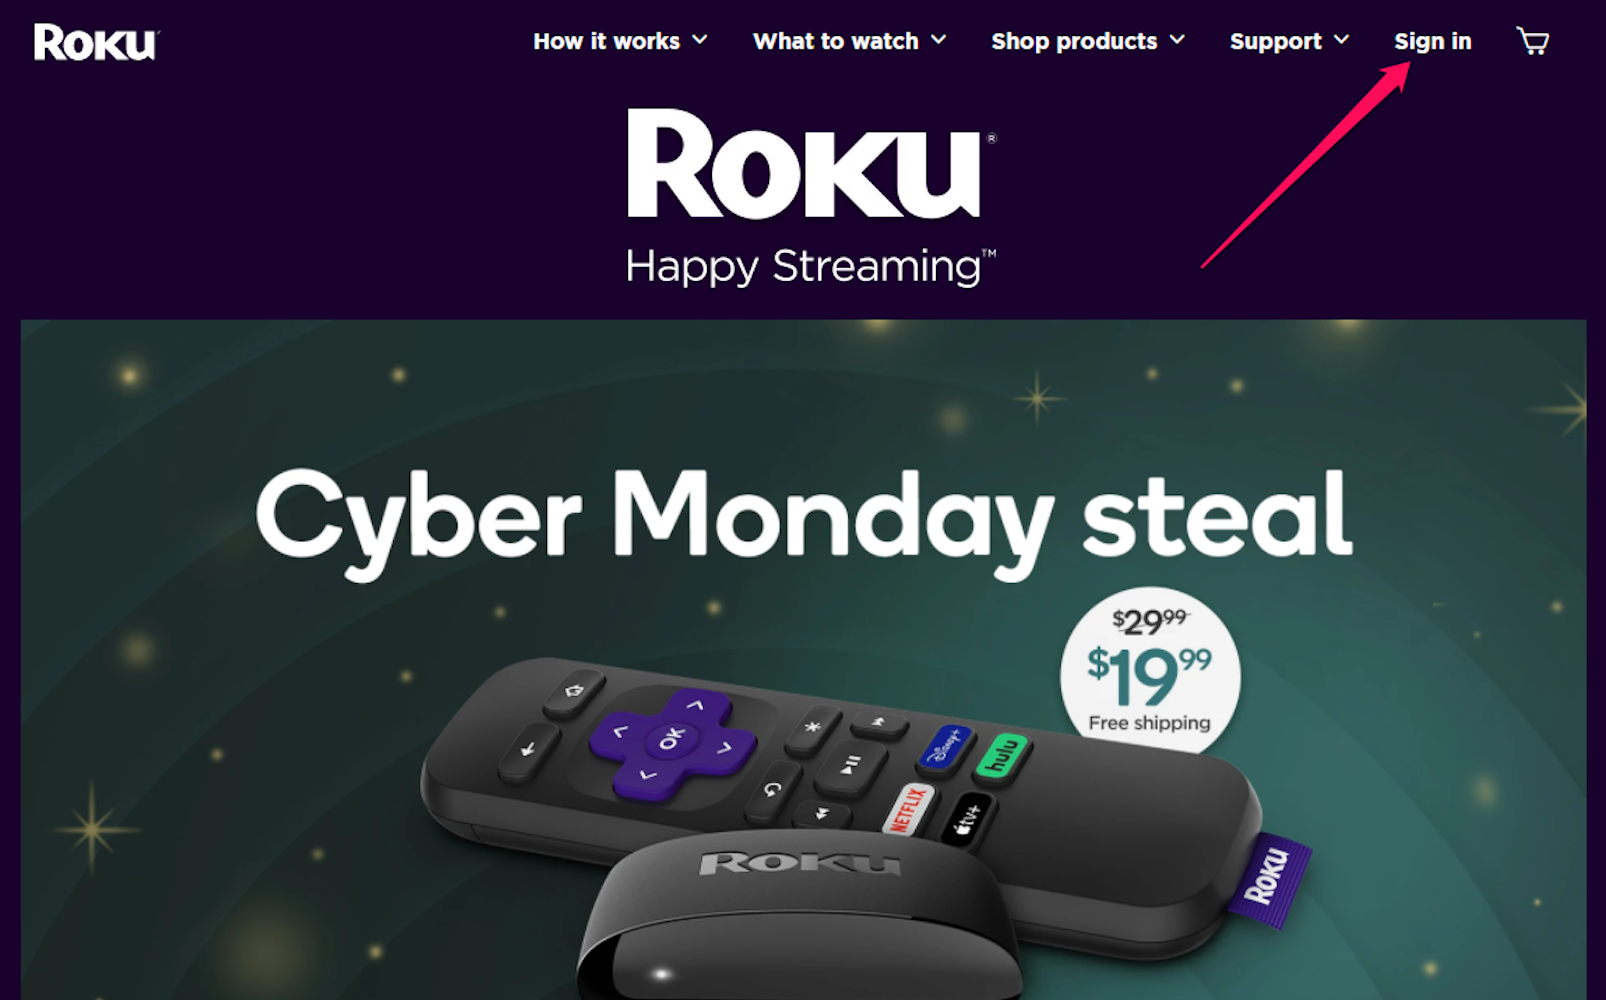 Screenshot of sign in button on Roku webssite